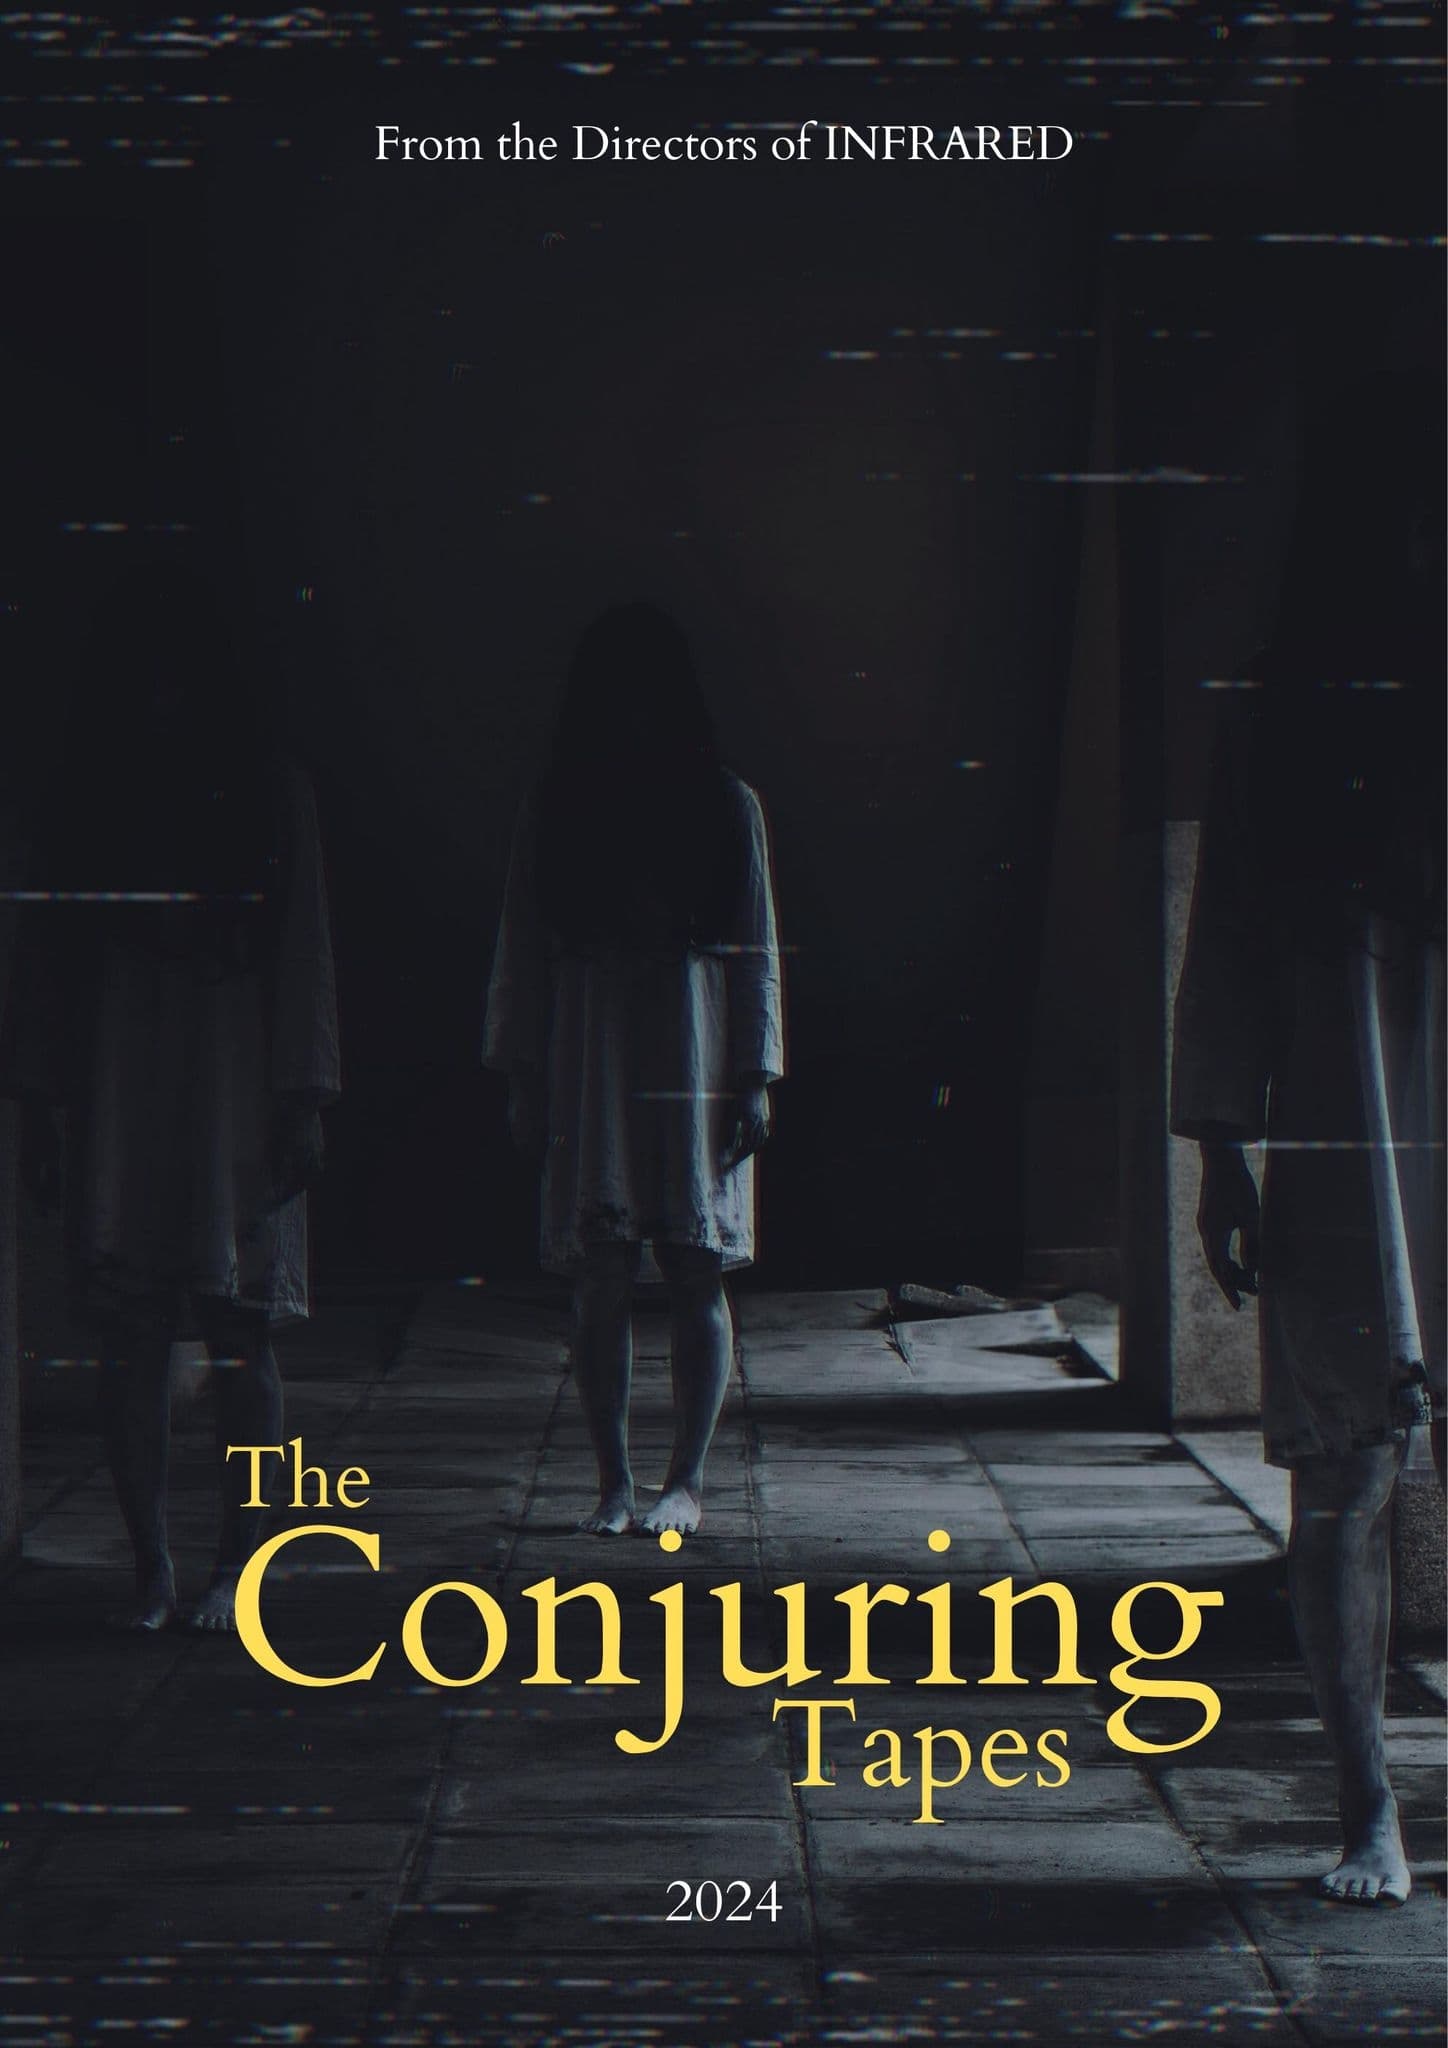 The Conjuring Tapes